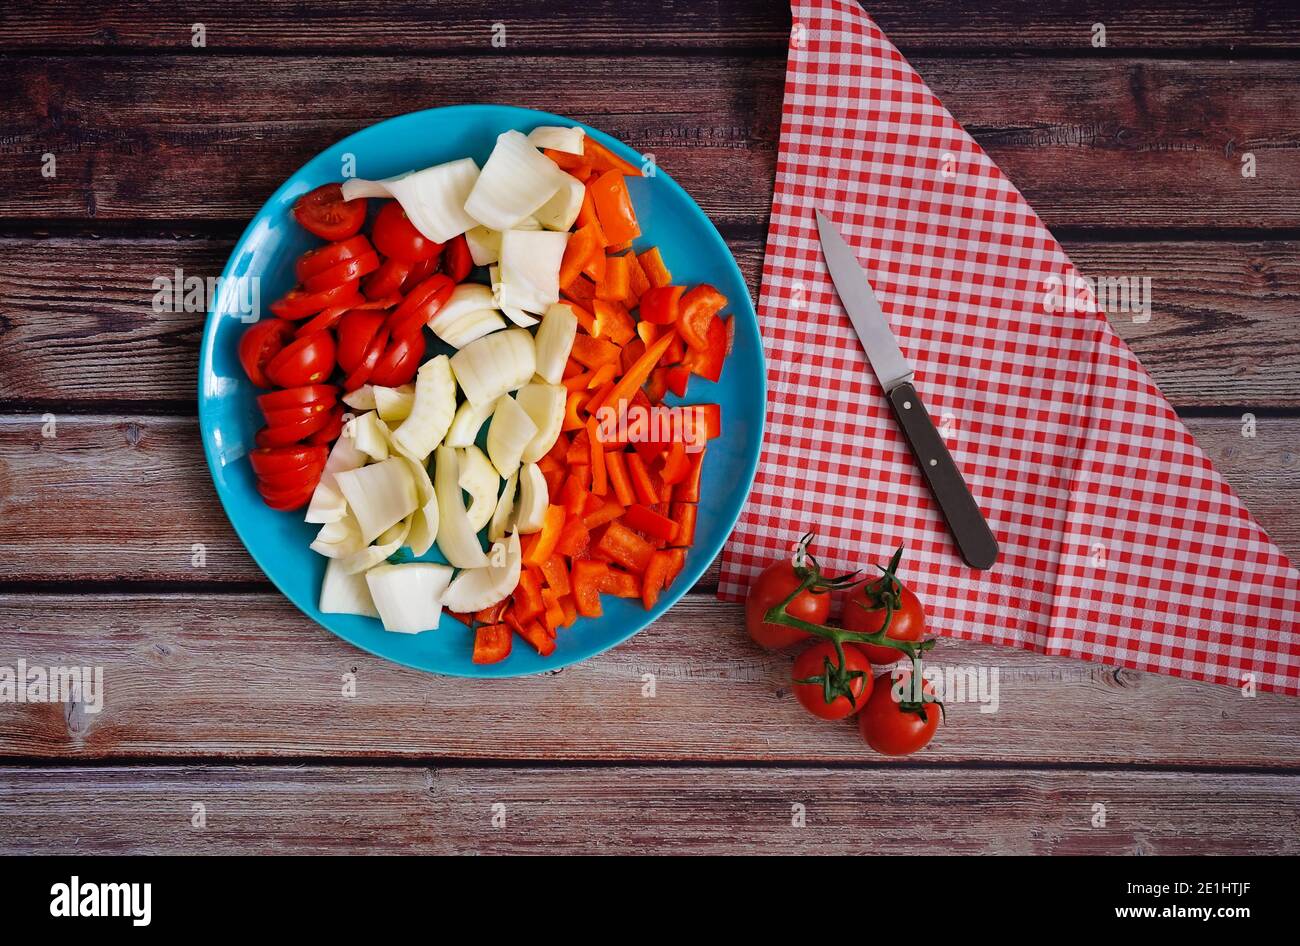 Freshly sliced vegetables (tomatoes, fennel and bell pepper) on a rustic wooden table. Preparation for healthy home cooking. Stock Photo